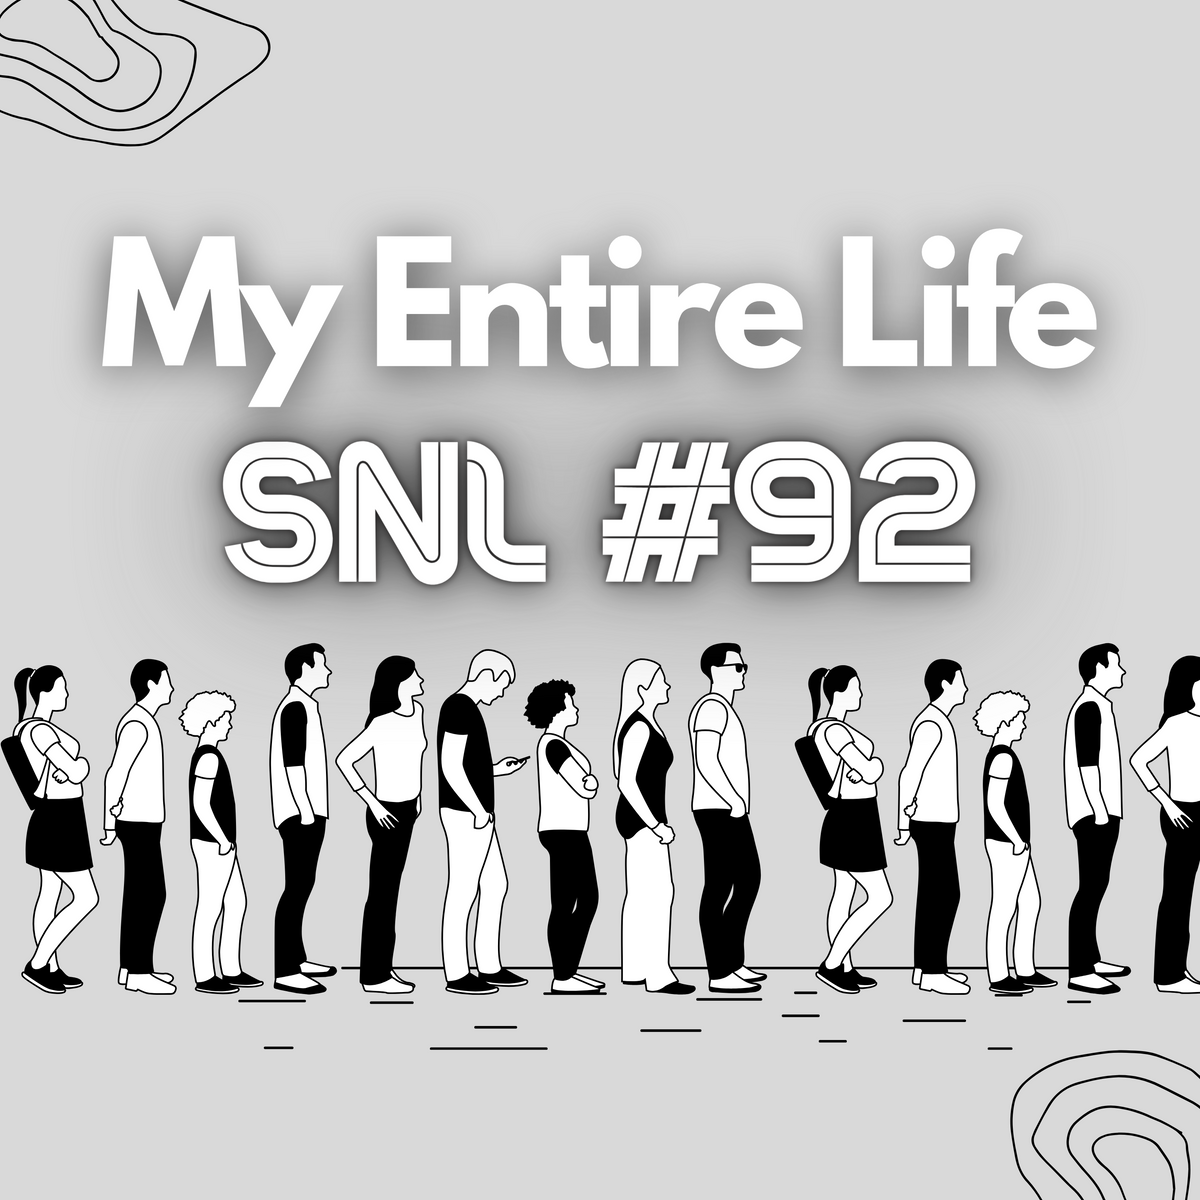 "My Entire Life" - Stacker News Saturday Newsletter